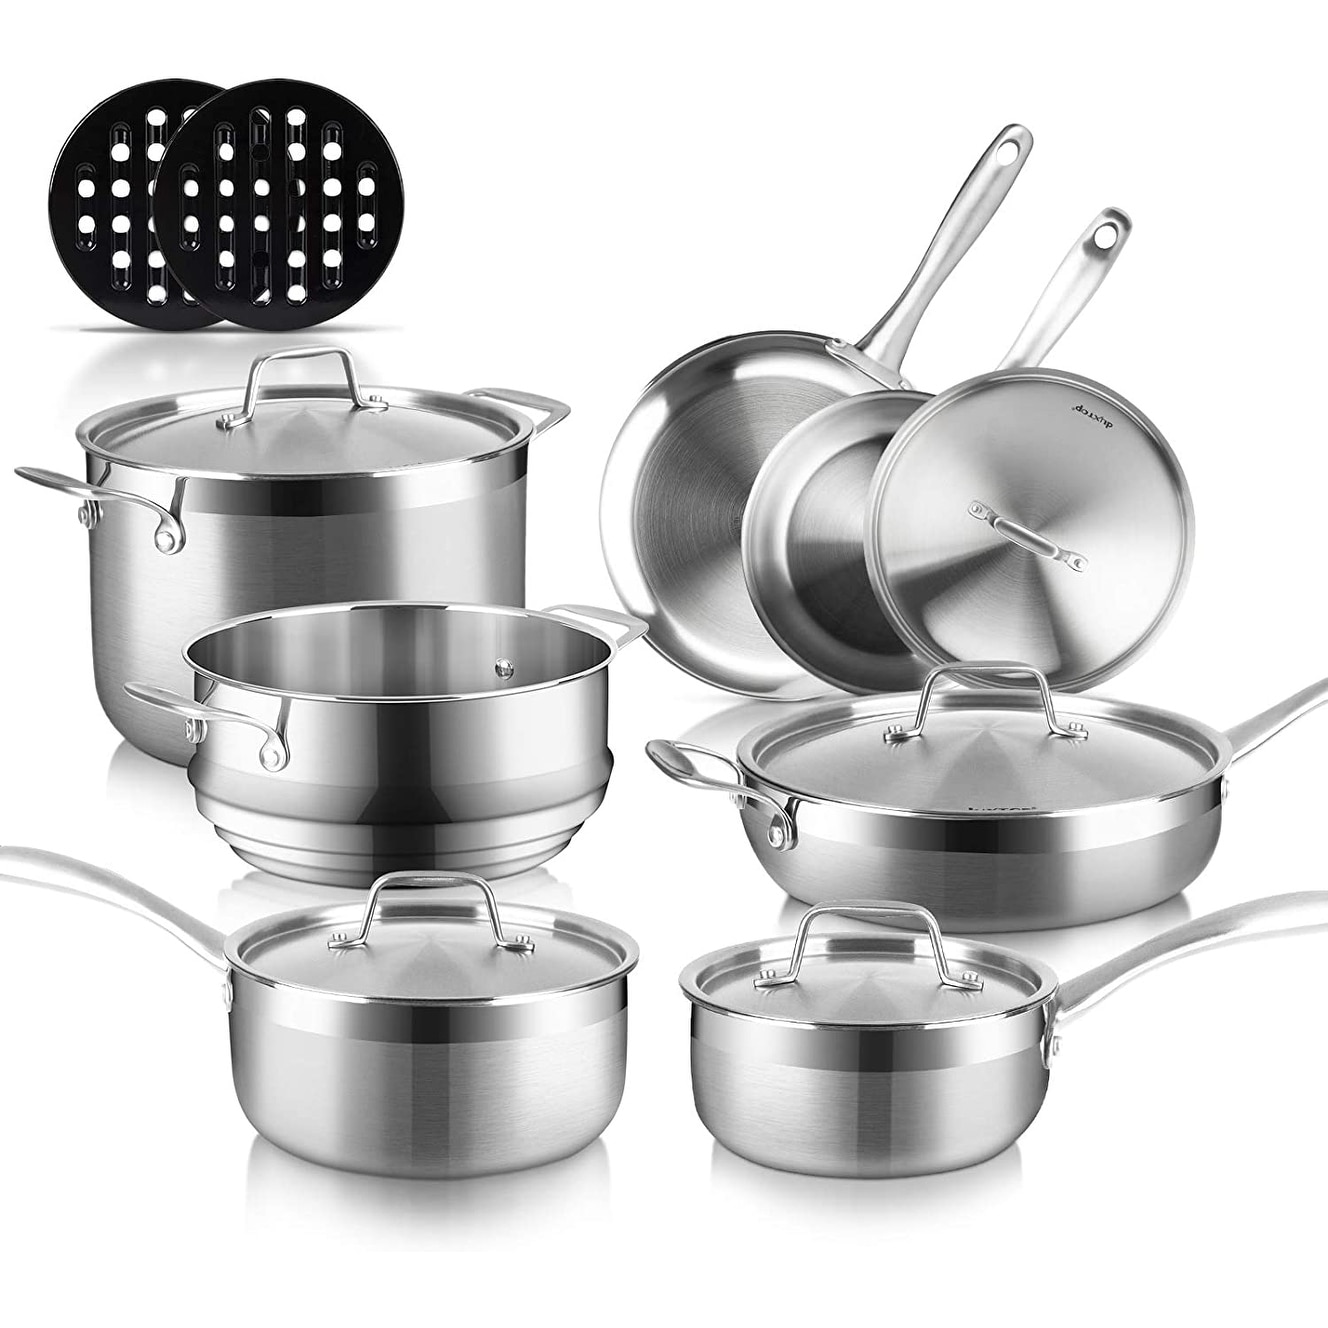 https://ak1.ostkcdn.com/images/products/is/images/direct/1a694533e13f29dc477adf5f830cedb7df2fe6b8/Duxtop-Whole-Clad-Tri-Ply-Stainless-Steel-Induction-Cookware-Set%2C-14PC-Kitchen-Pots-and-Pans-Set.jpg